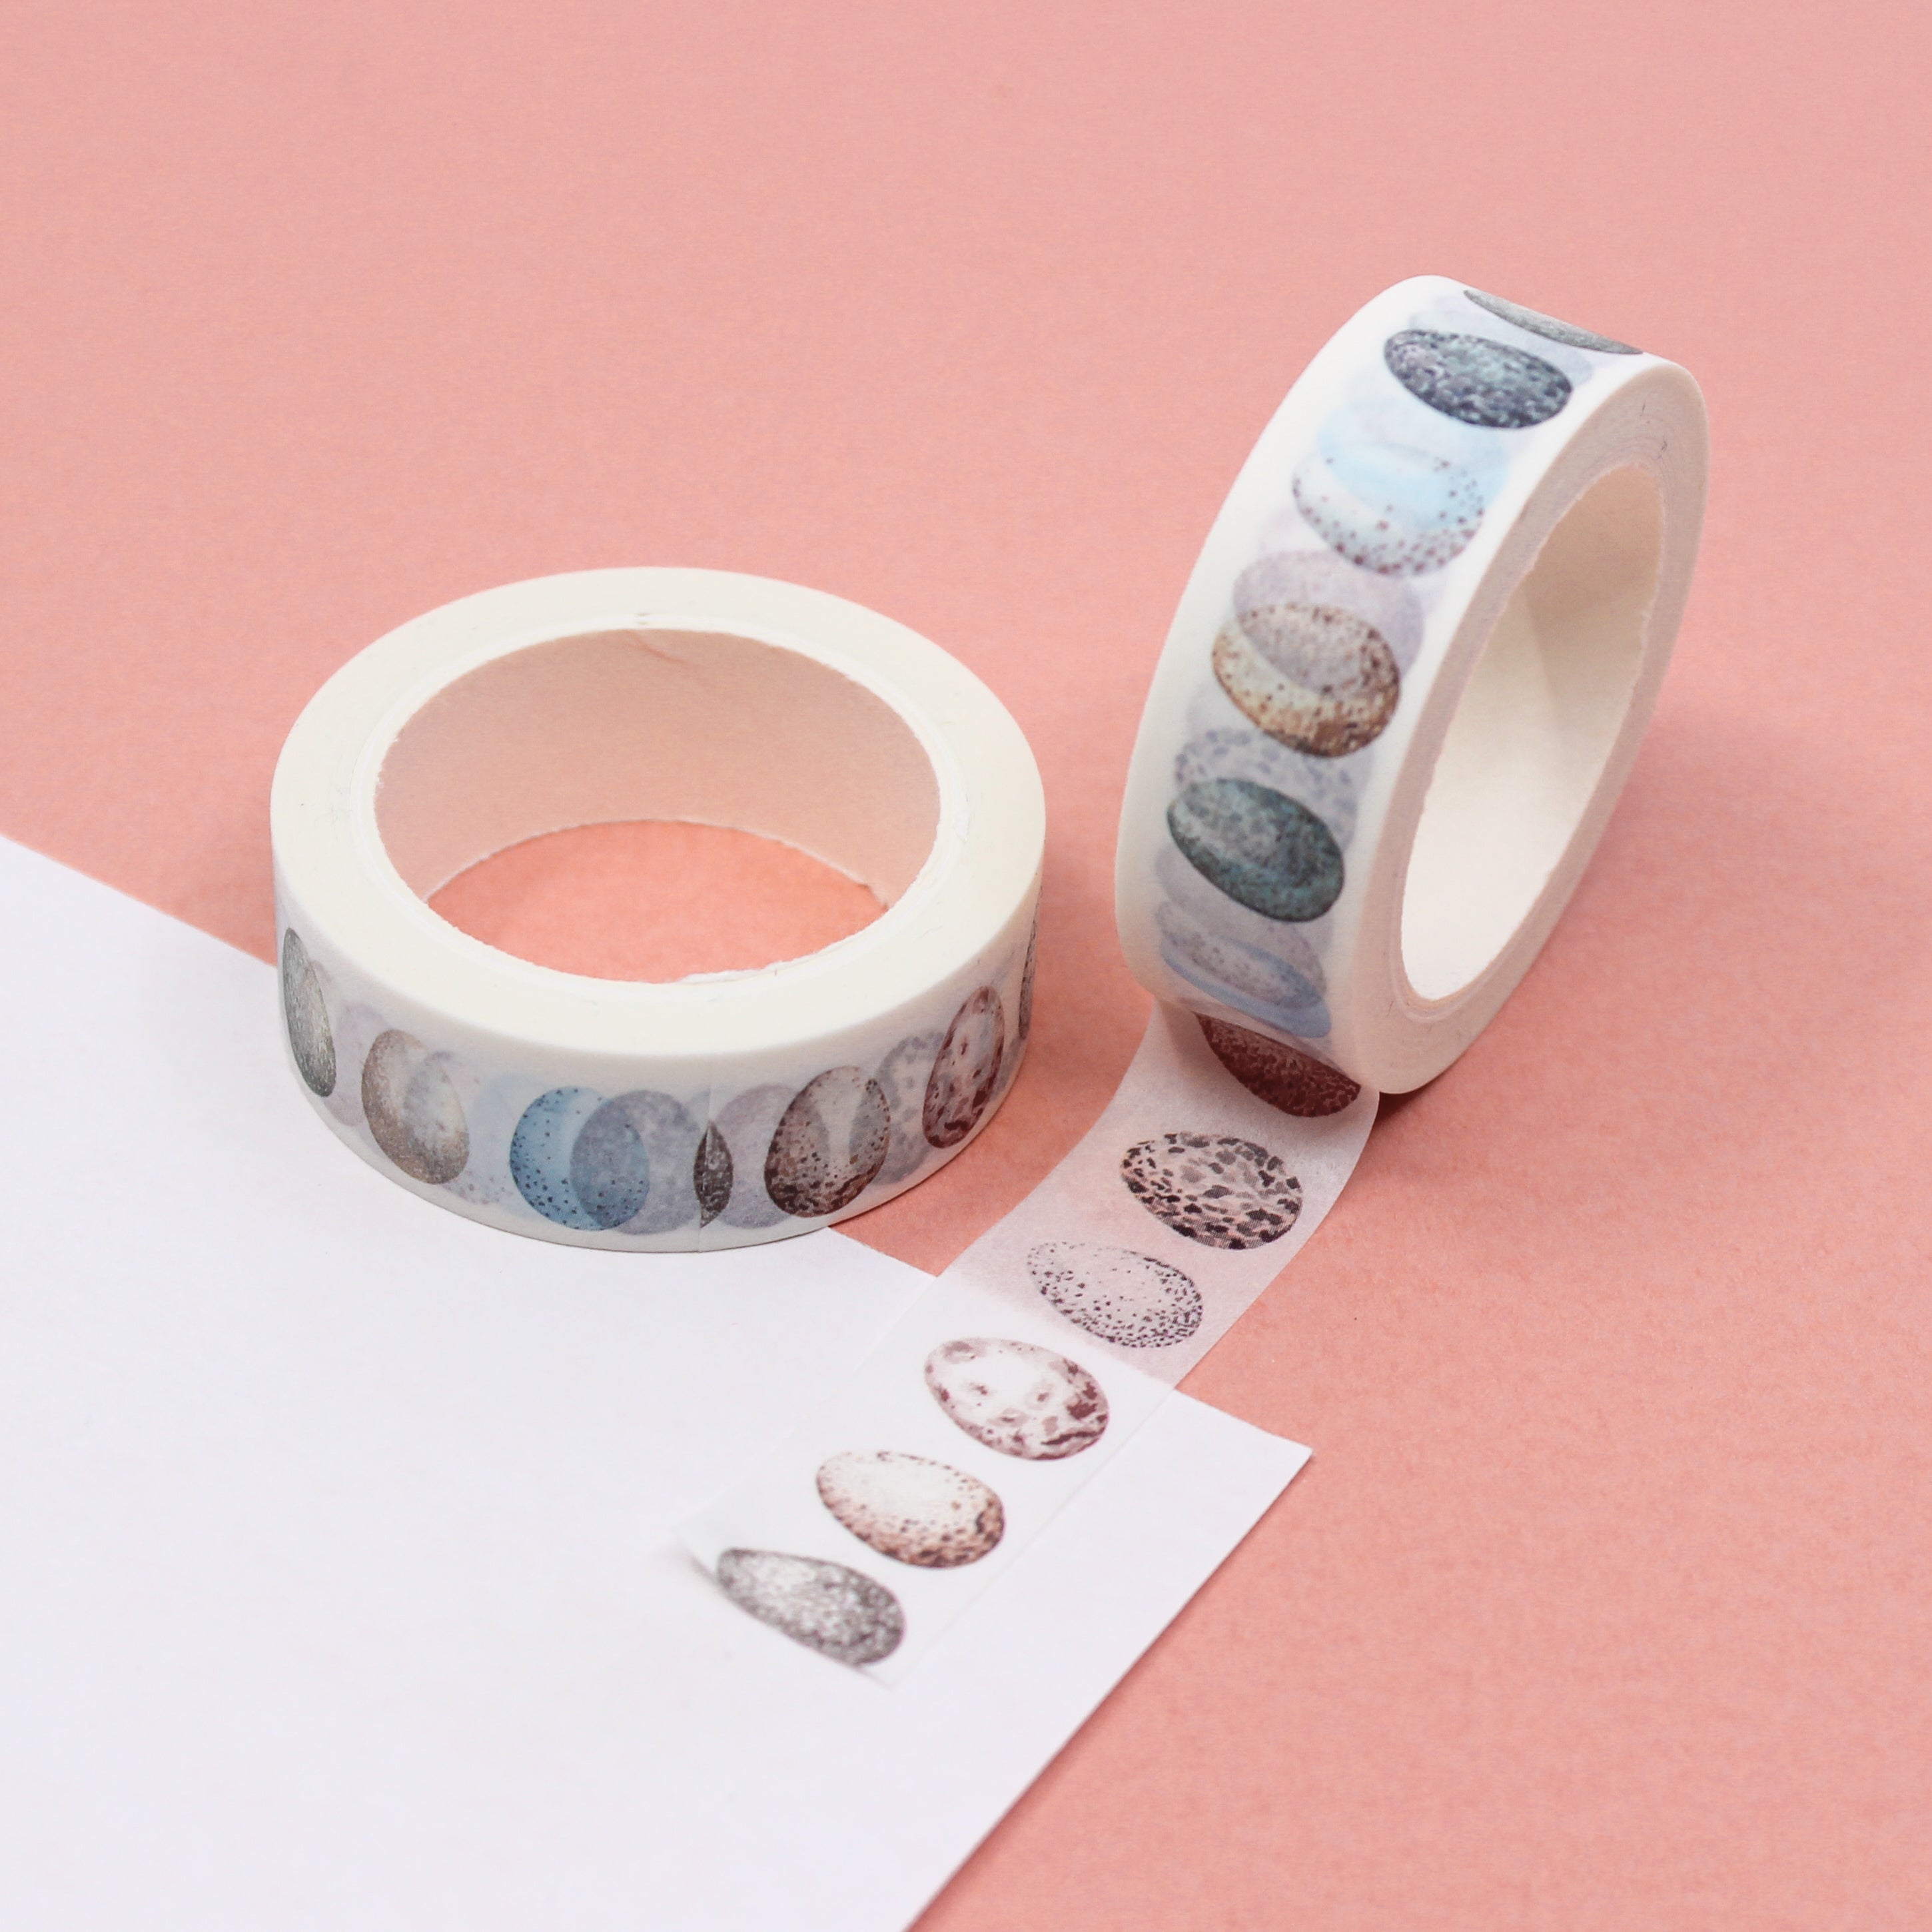 Celebrate the beauty of British bird eggs with our British Bird Eggs Washi Tape, featuring delicate illustrations of eggs from native bird species. Ideal for adding a touch of ornithological wonder to your projects. This tape is designed by Sarah Francis and sold at BBB Supplies Craft Shop.